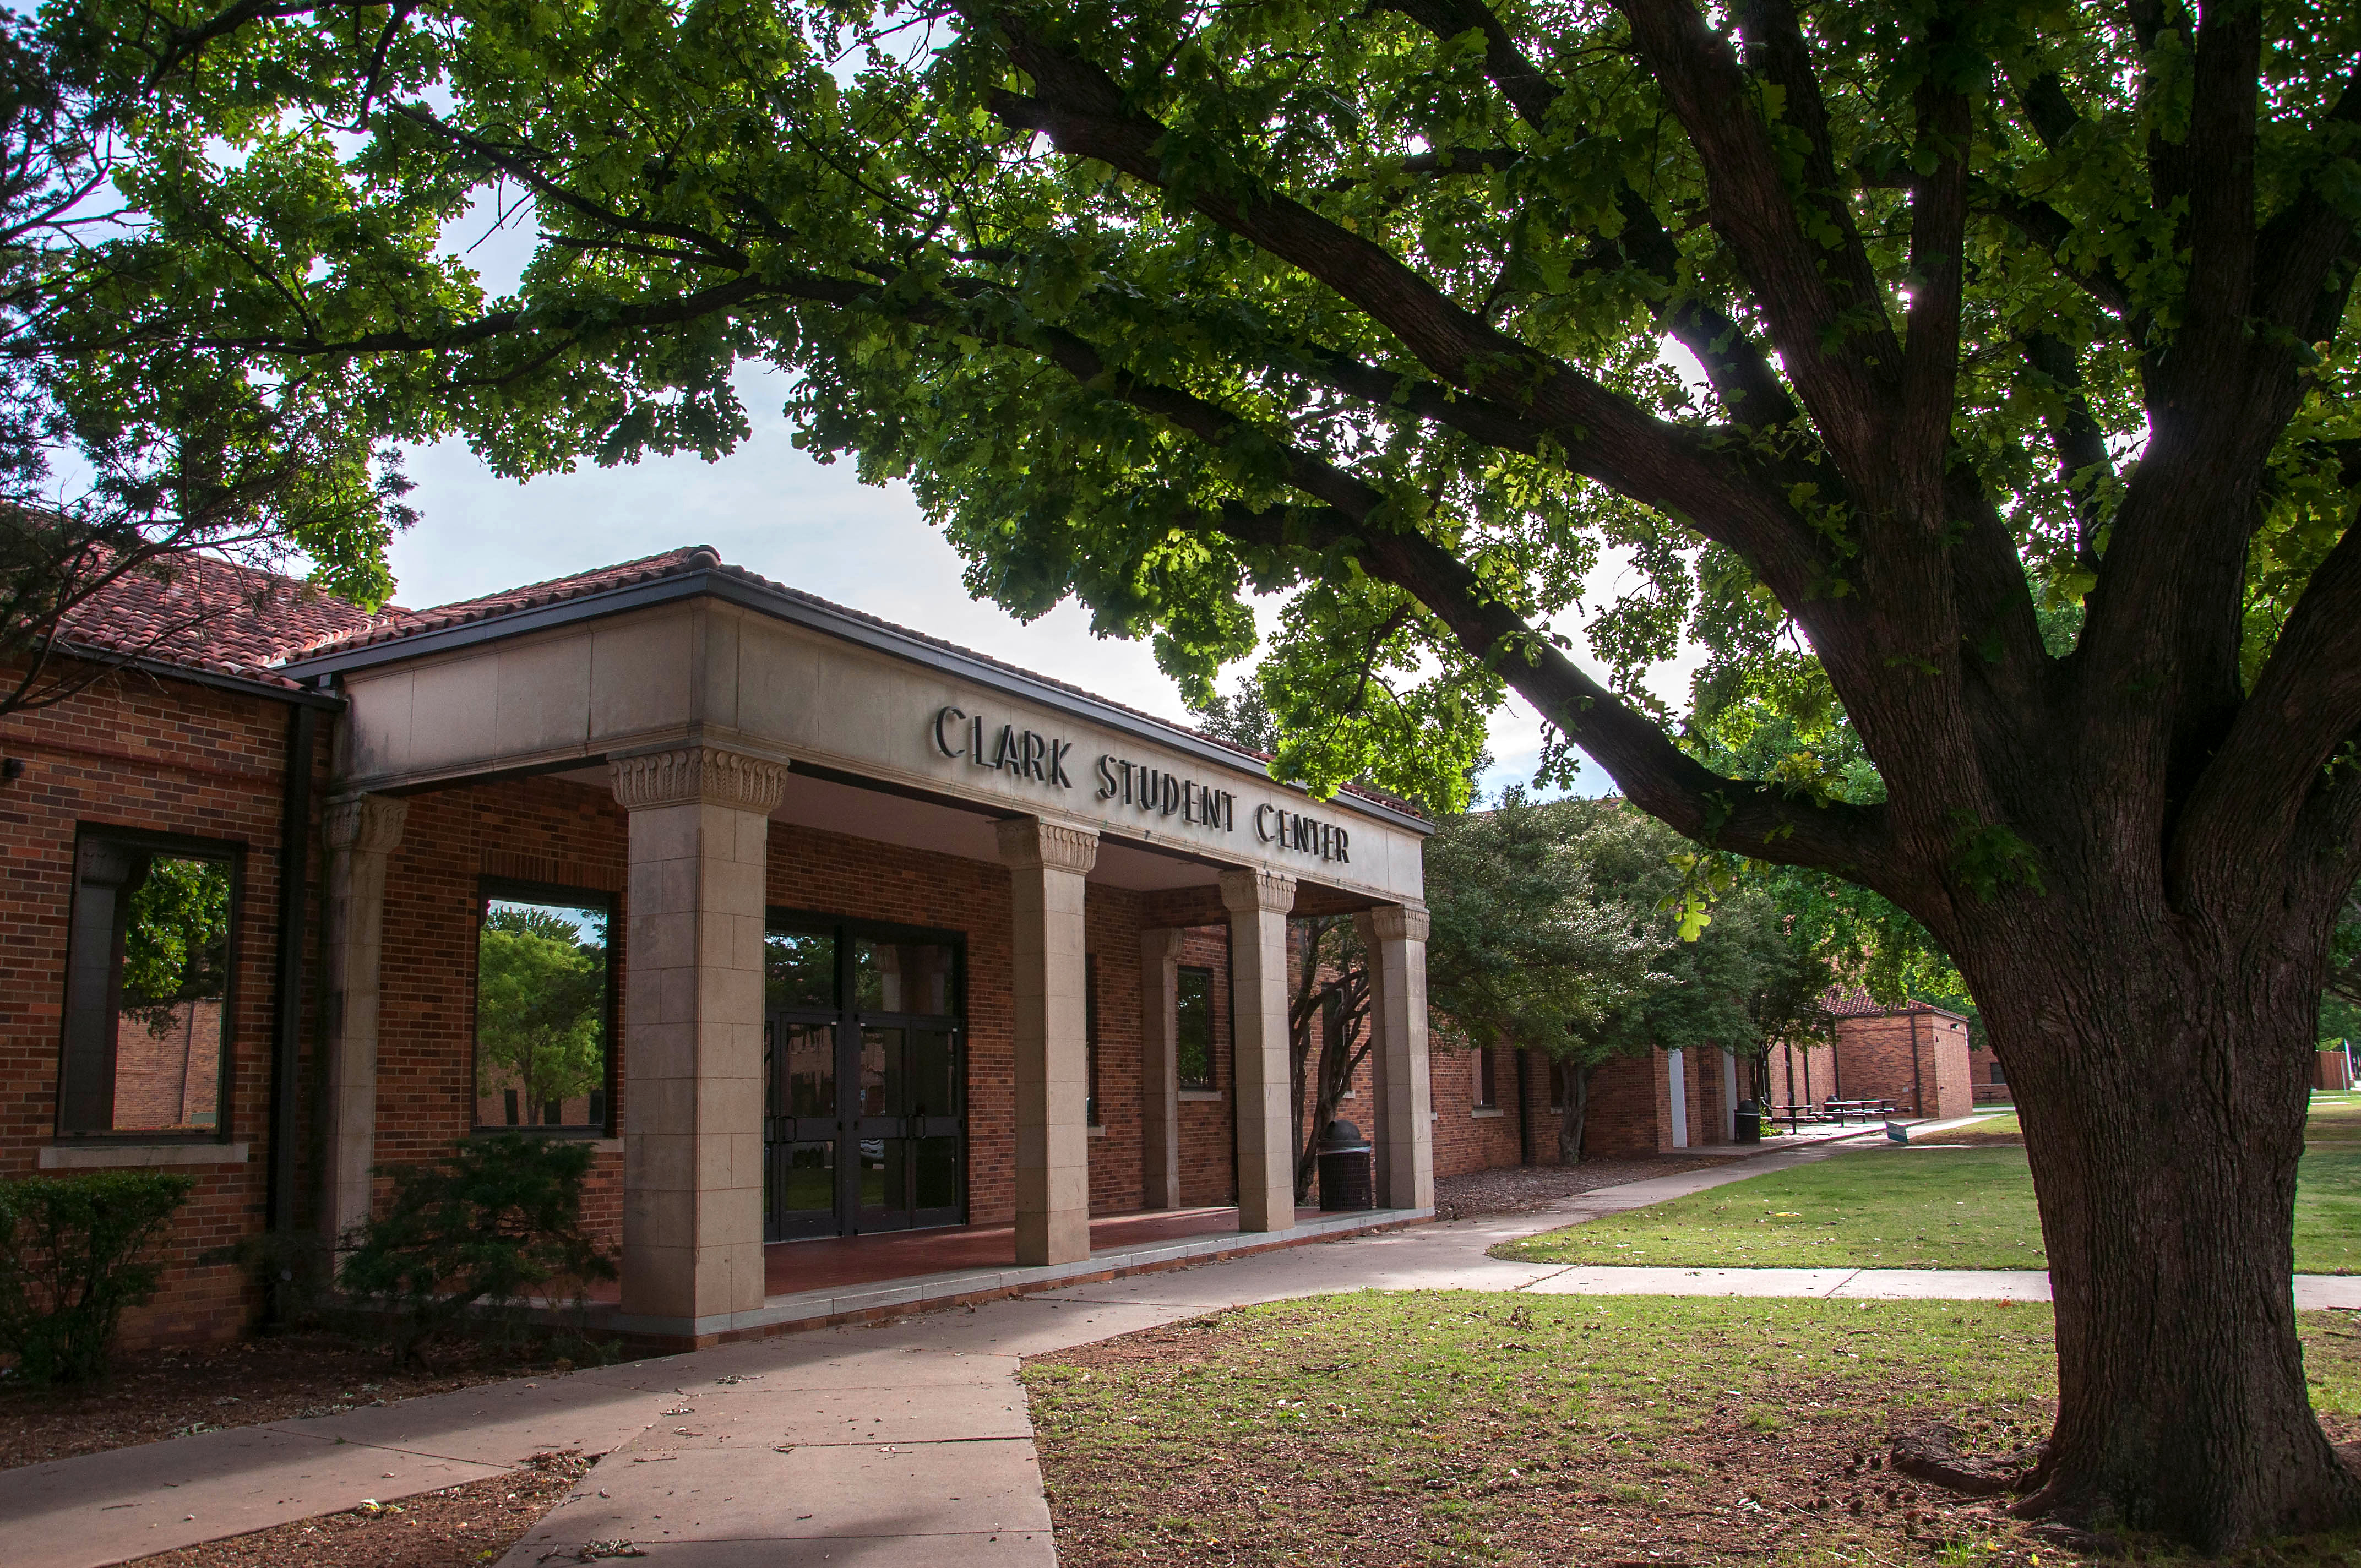 Entrance view of Clark Student Center